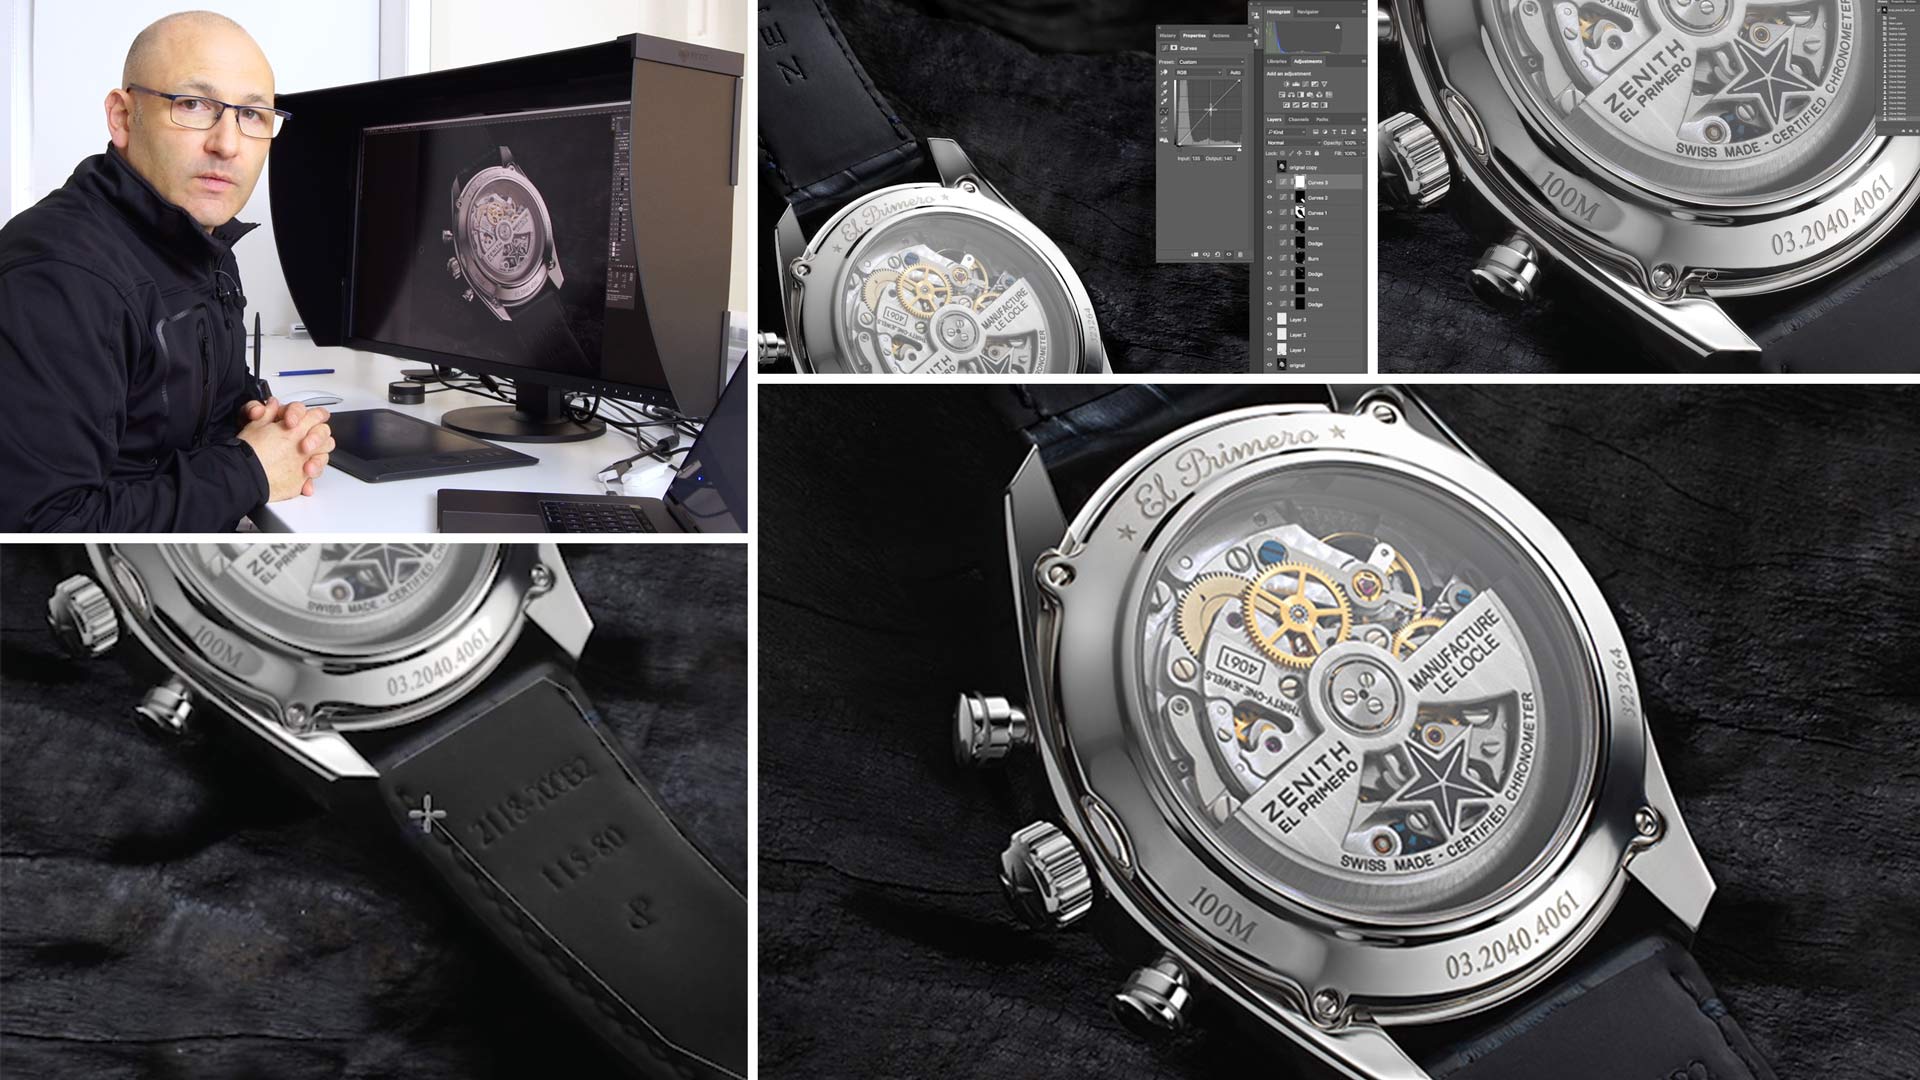 Zenith Watch Post-Production 2: Clean-up and Final Touches